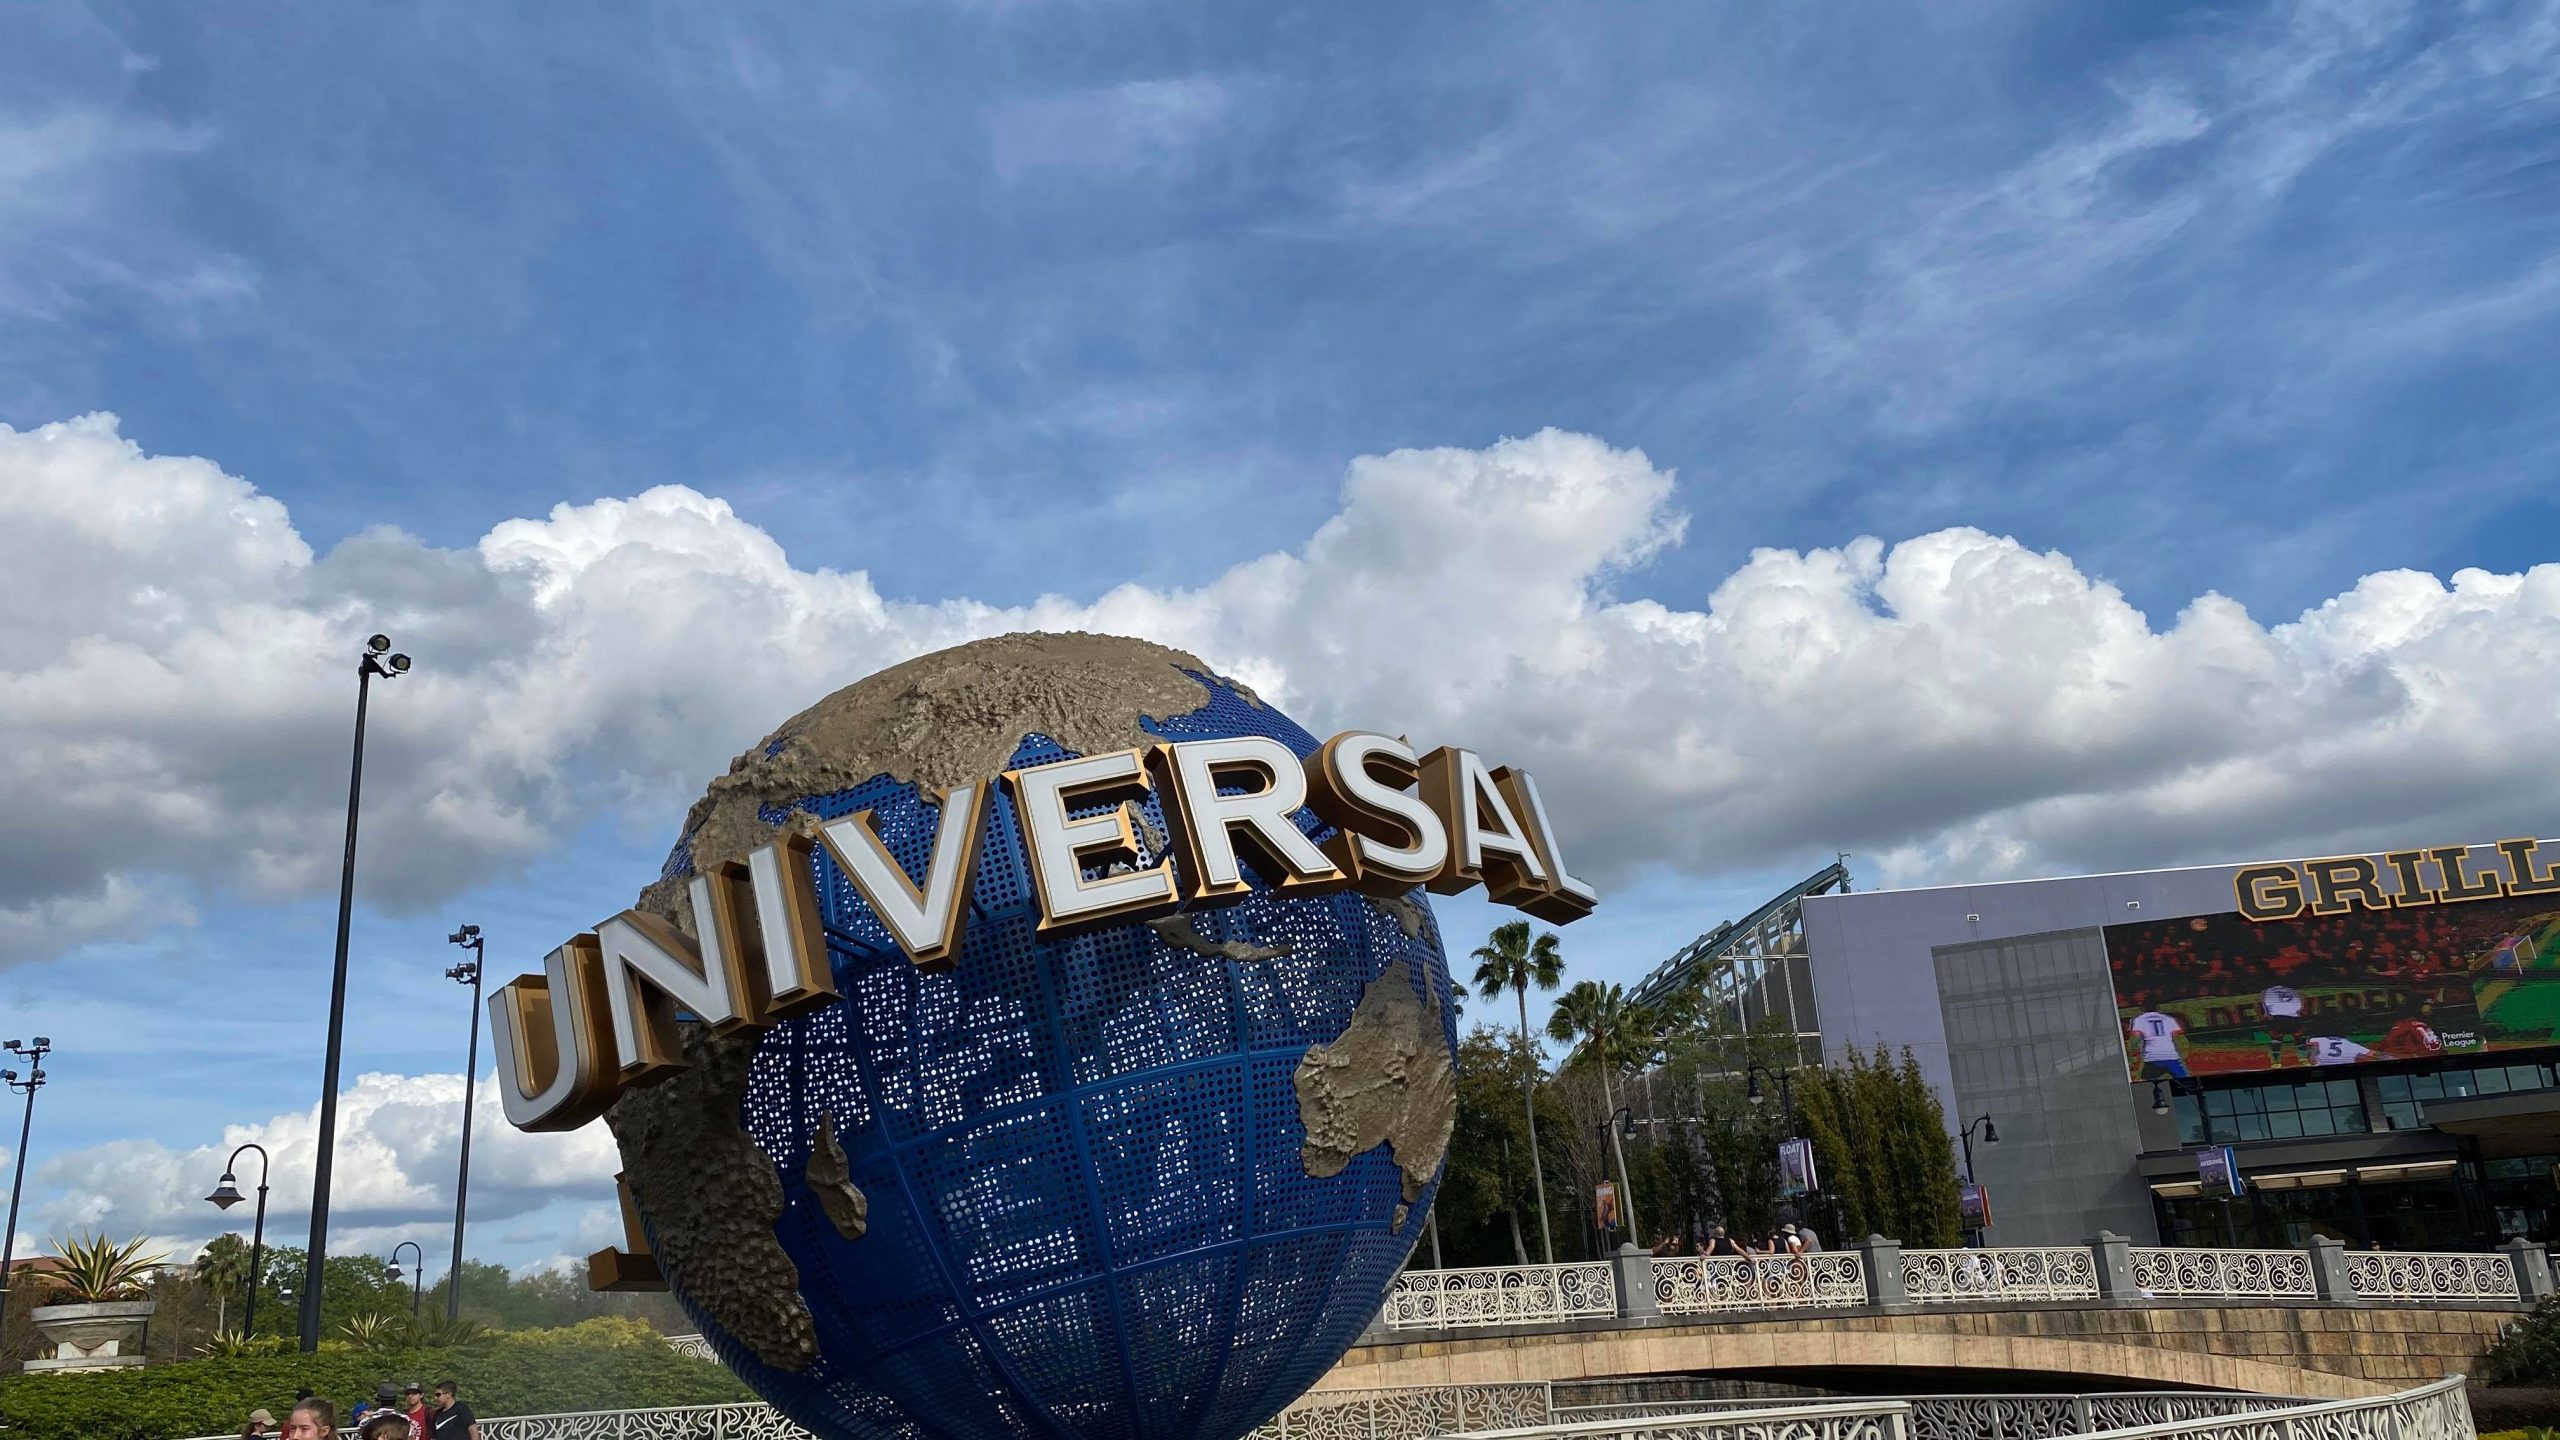 Universal Orlando Releases Statement to Extend Closure